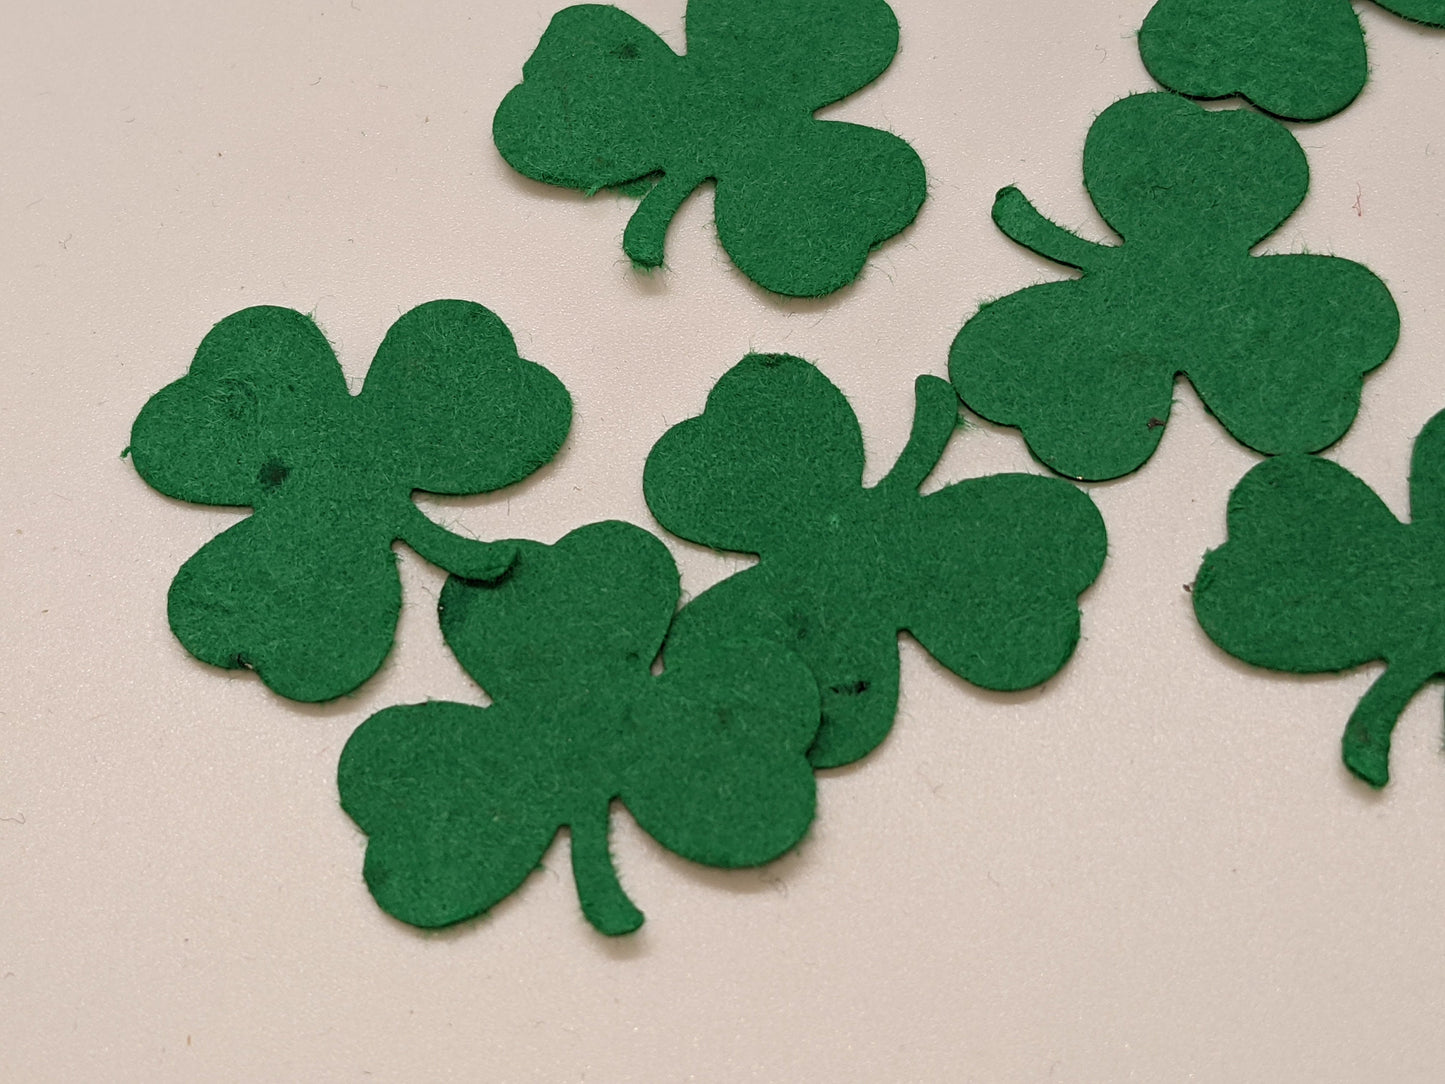 Biodegradable Seed Paper Confetti : Shamrock Clover